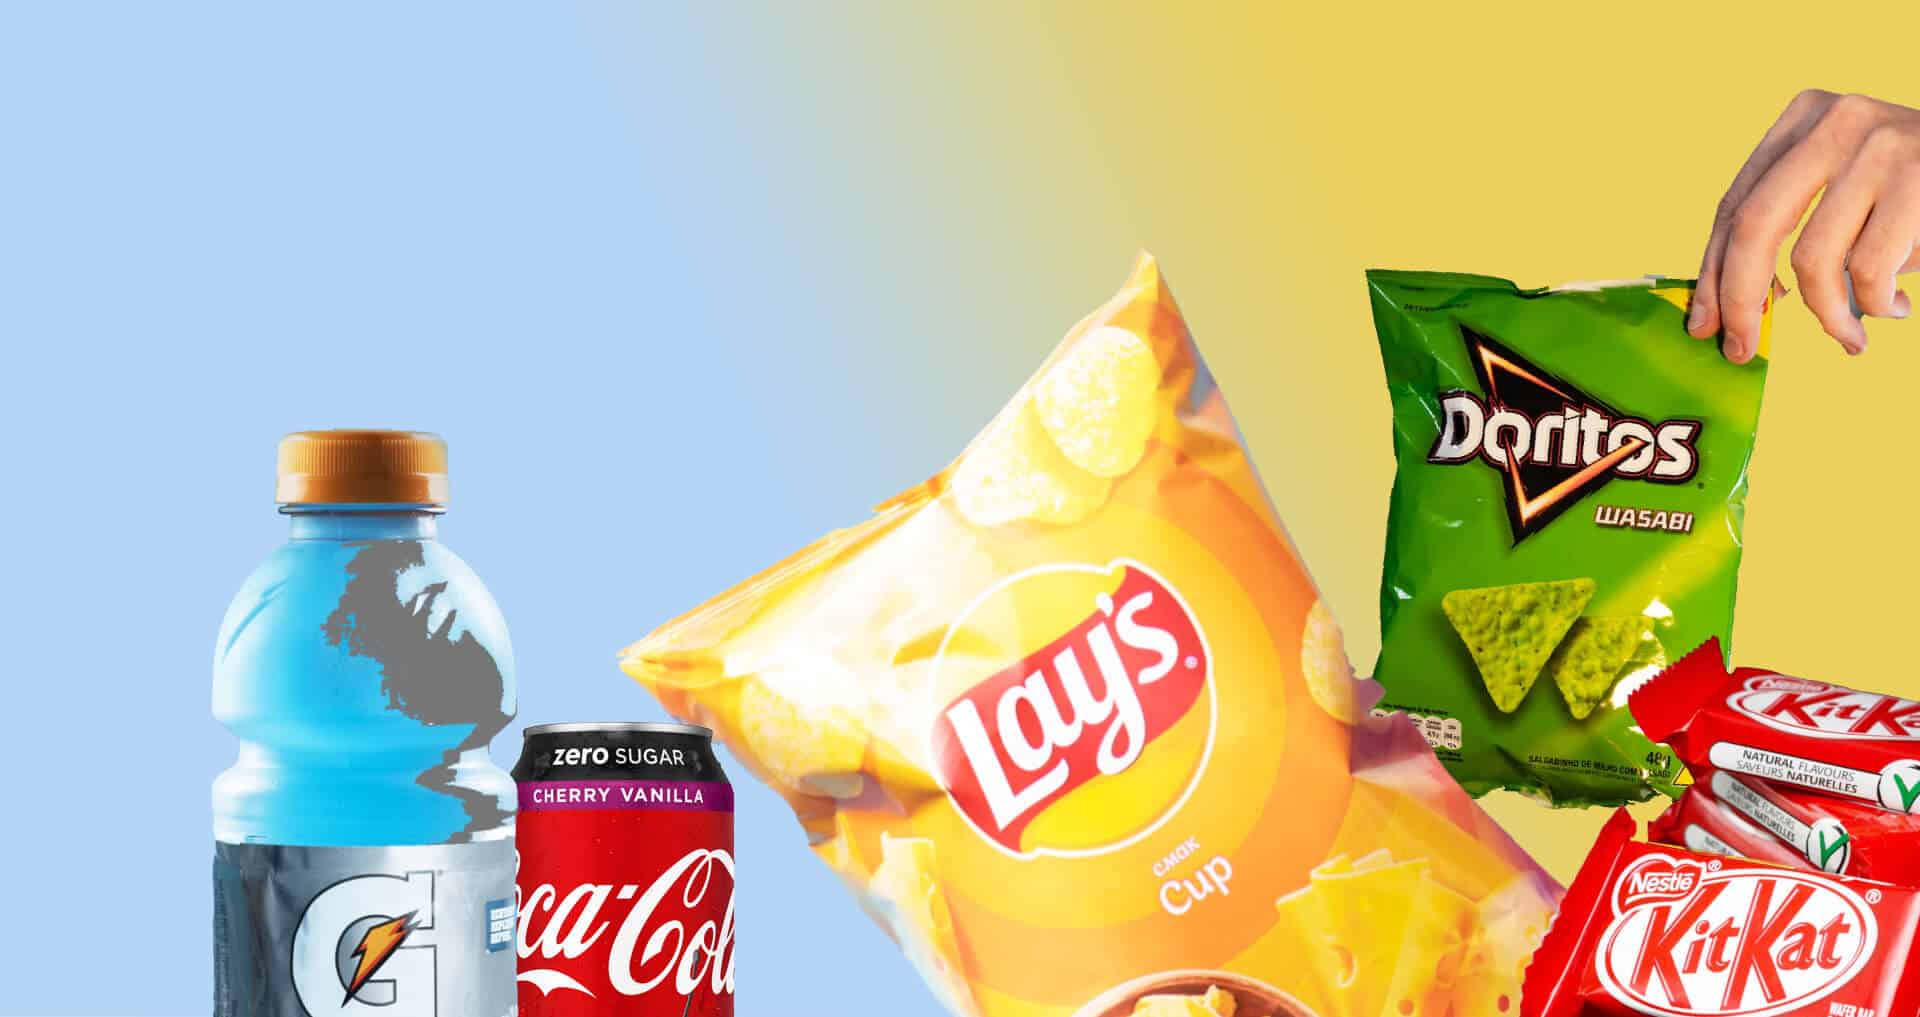 An assortment of popular snacks and drinks that are often sold in combo vending machines.